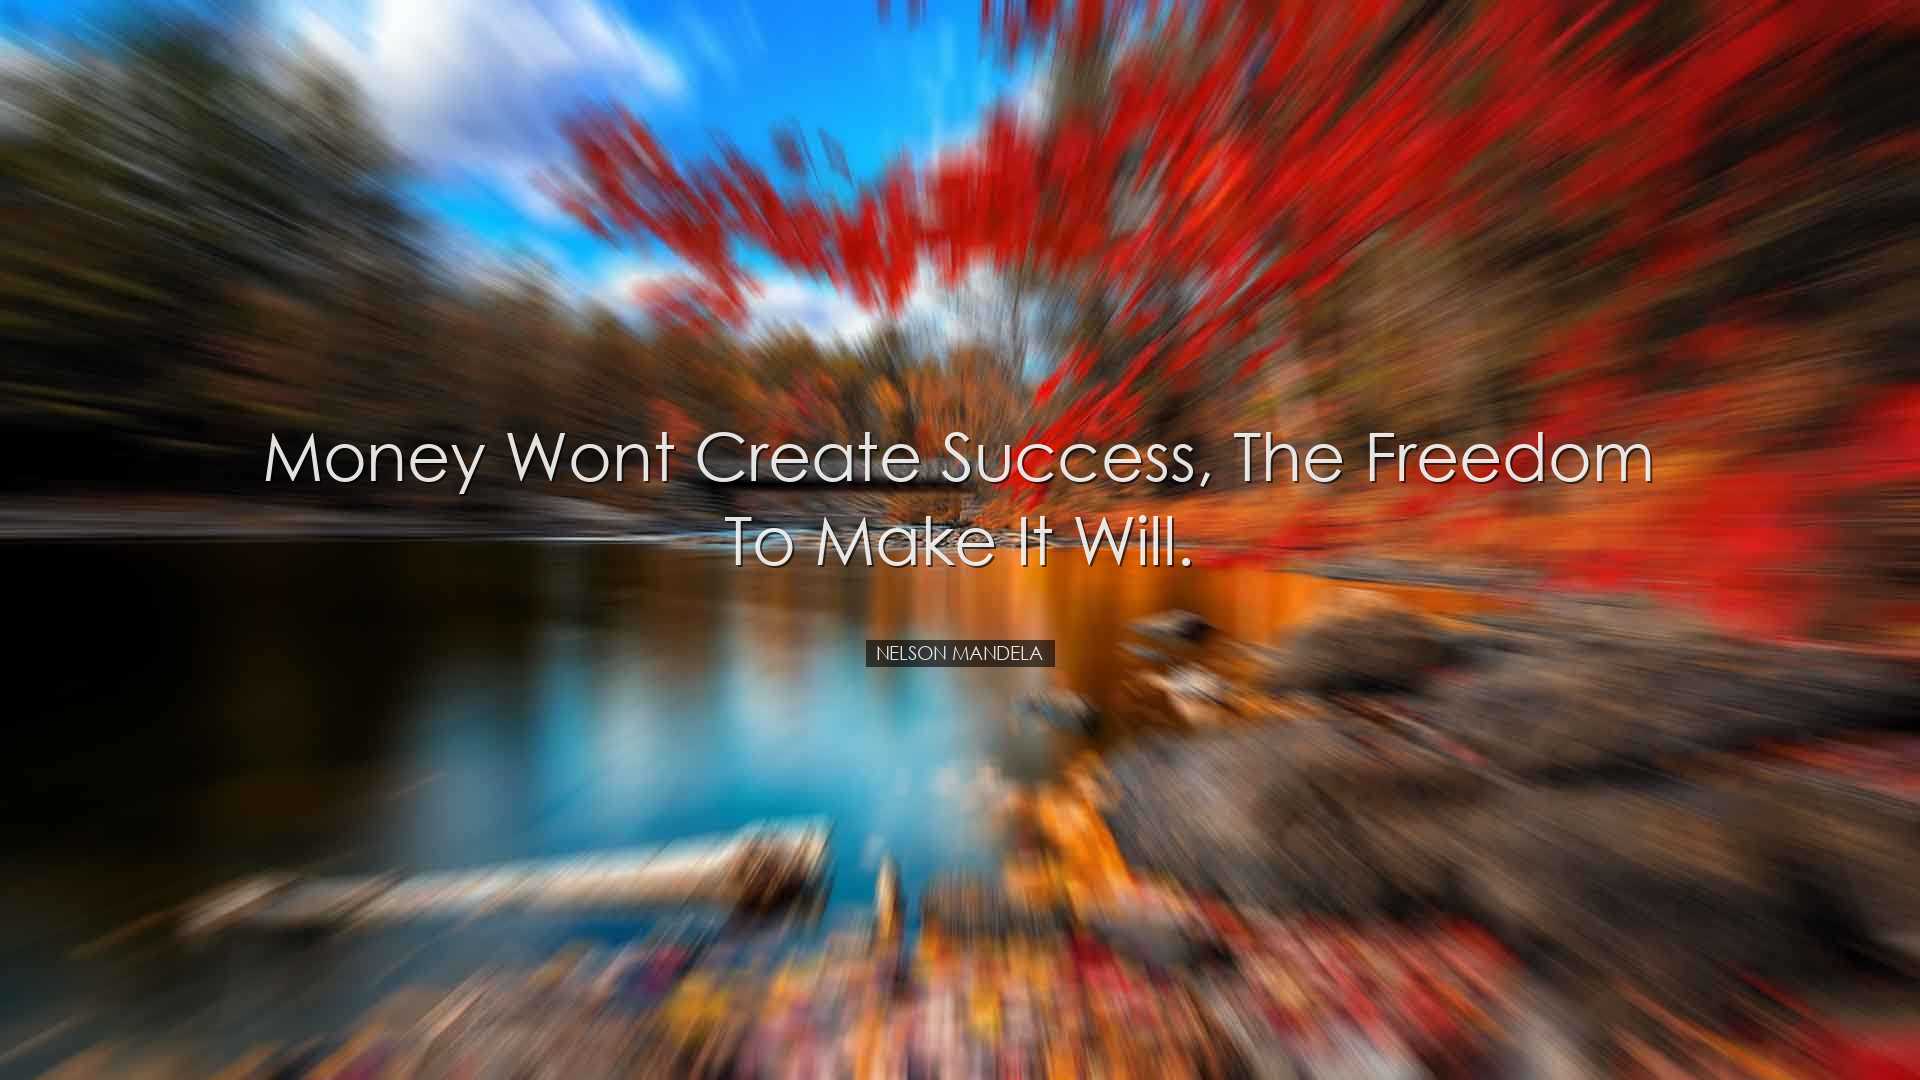 Money wont create success, the freedom to make it will. - Nelson M